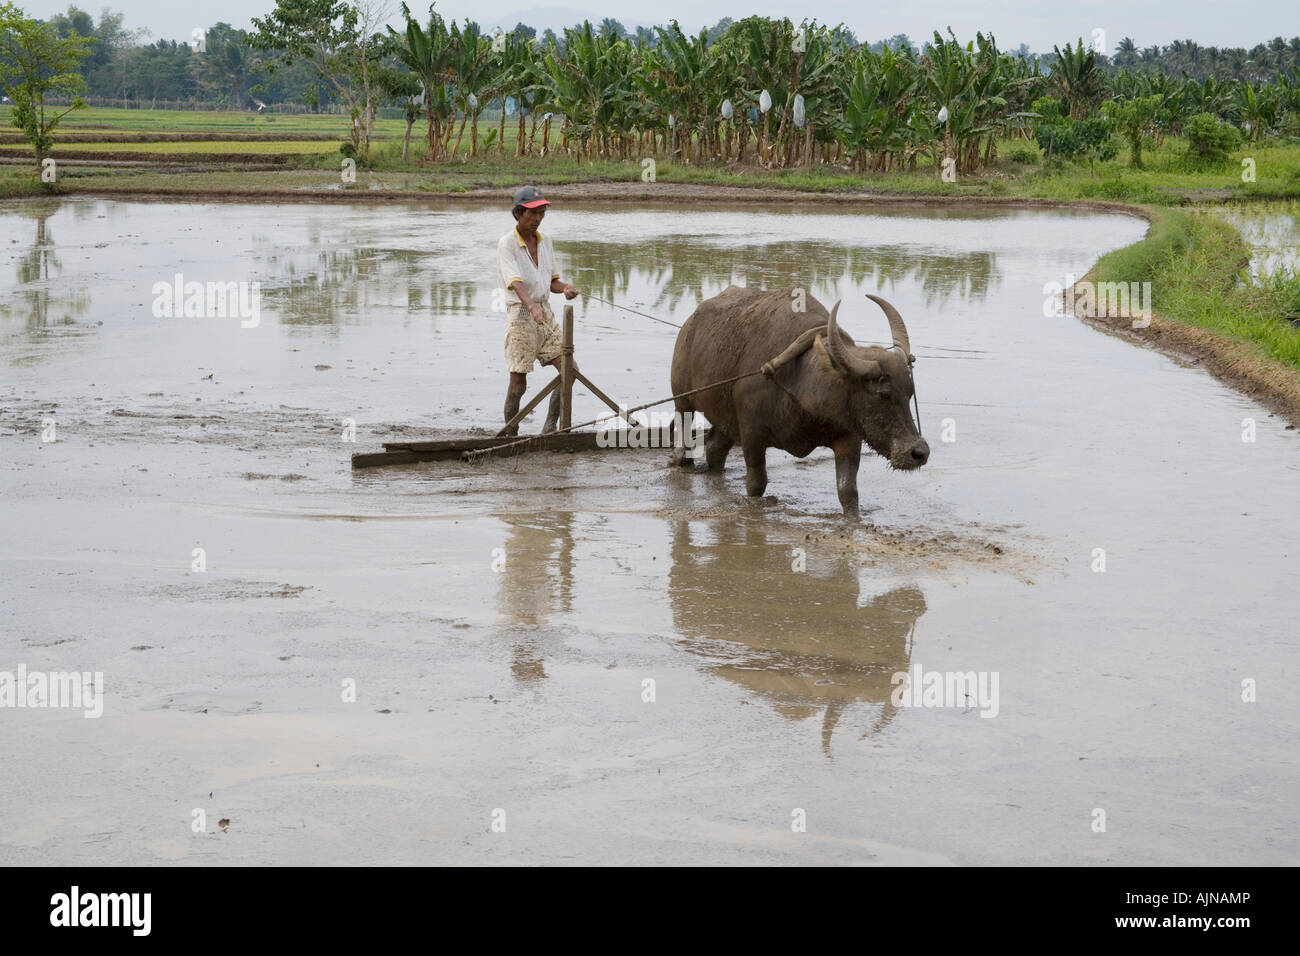 A Filipino Rice Farmer Prepares The Field For Rice Planting Using